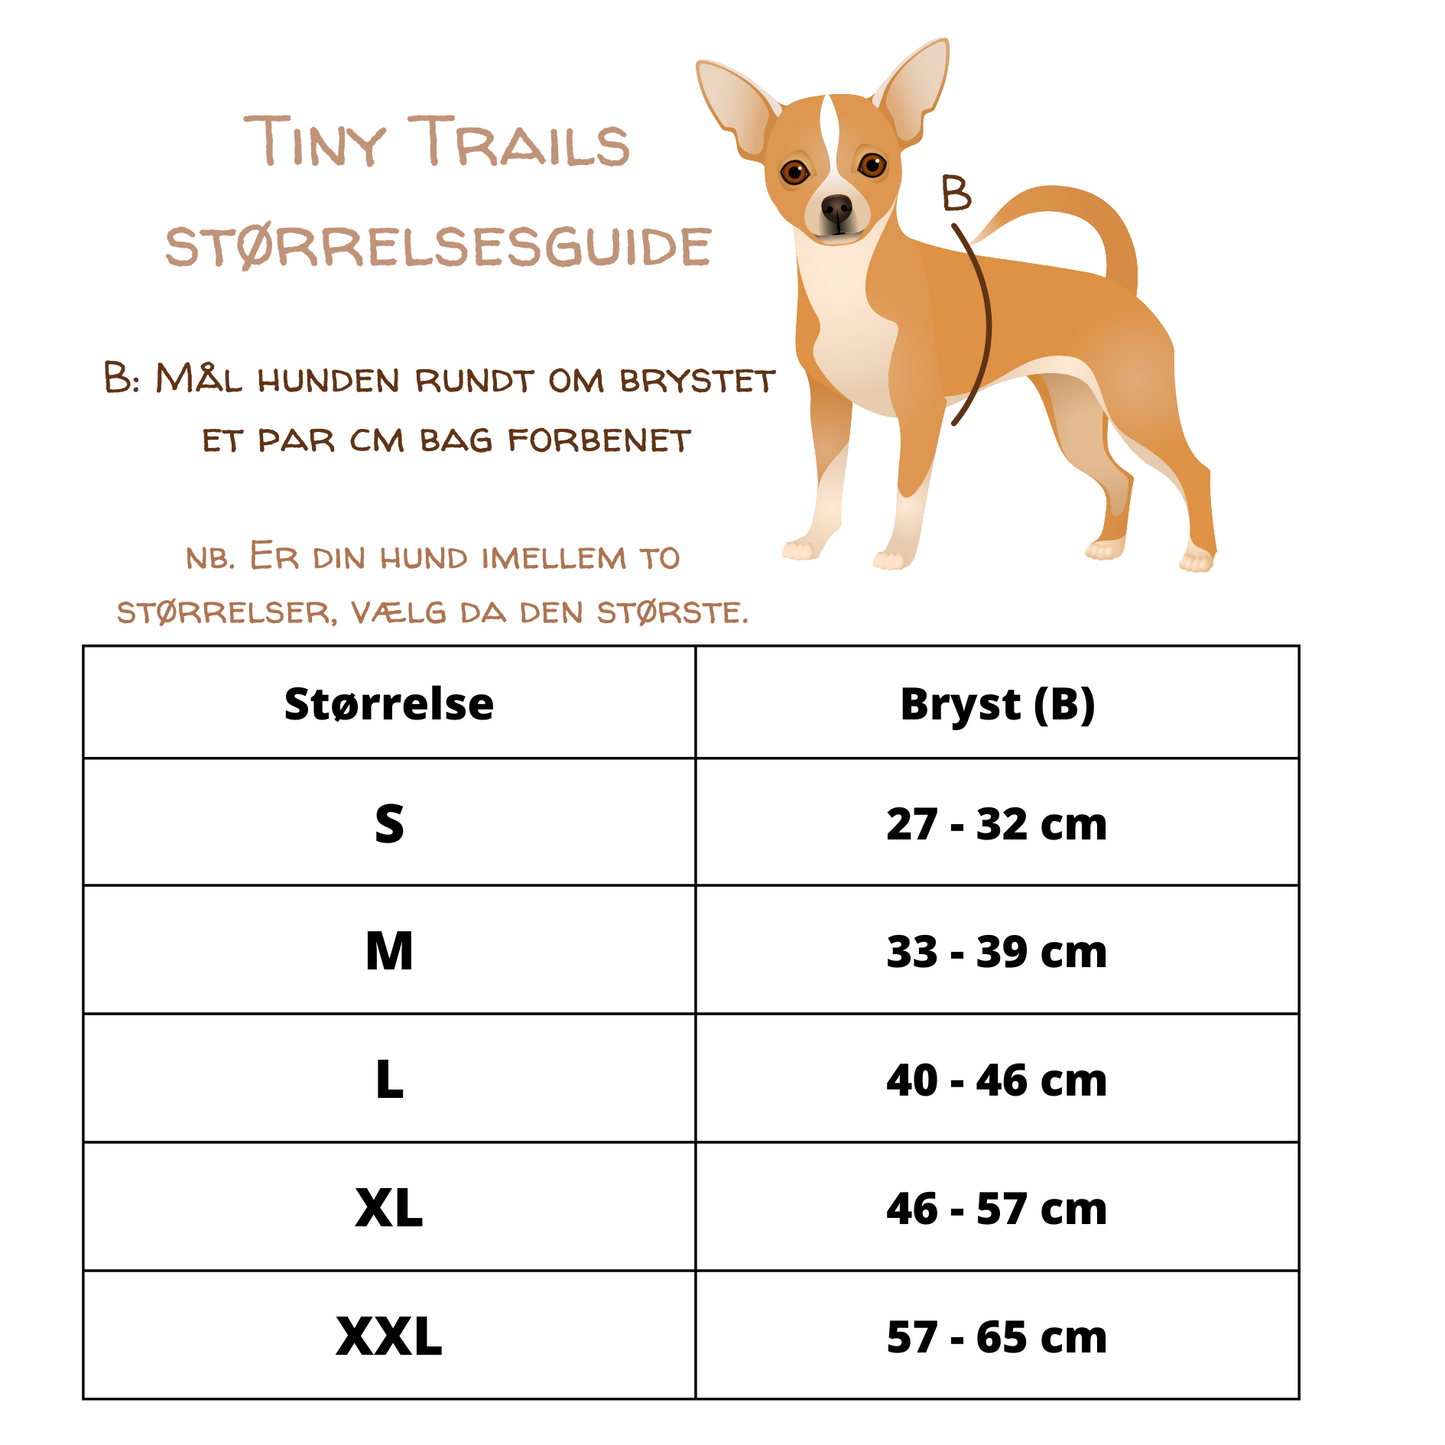 Tiny Trails step-in hundesele - Leaf me not